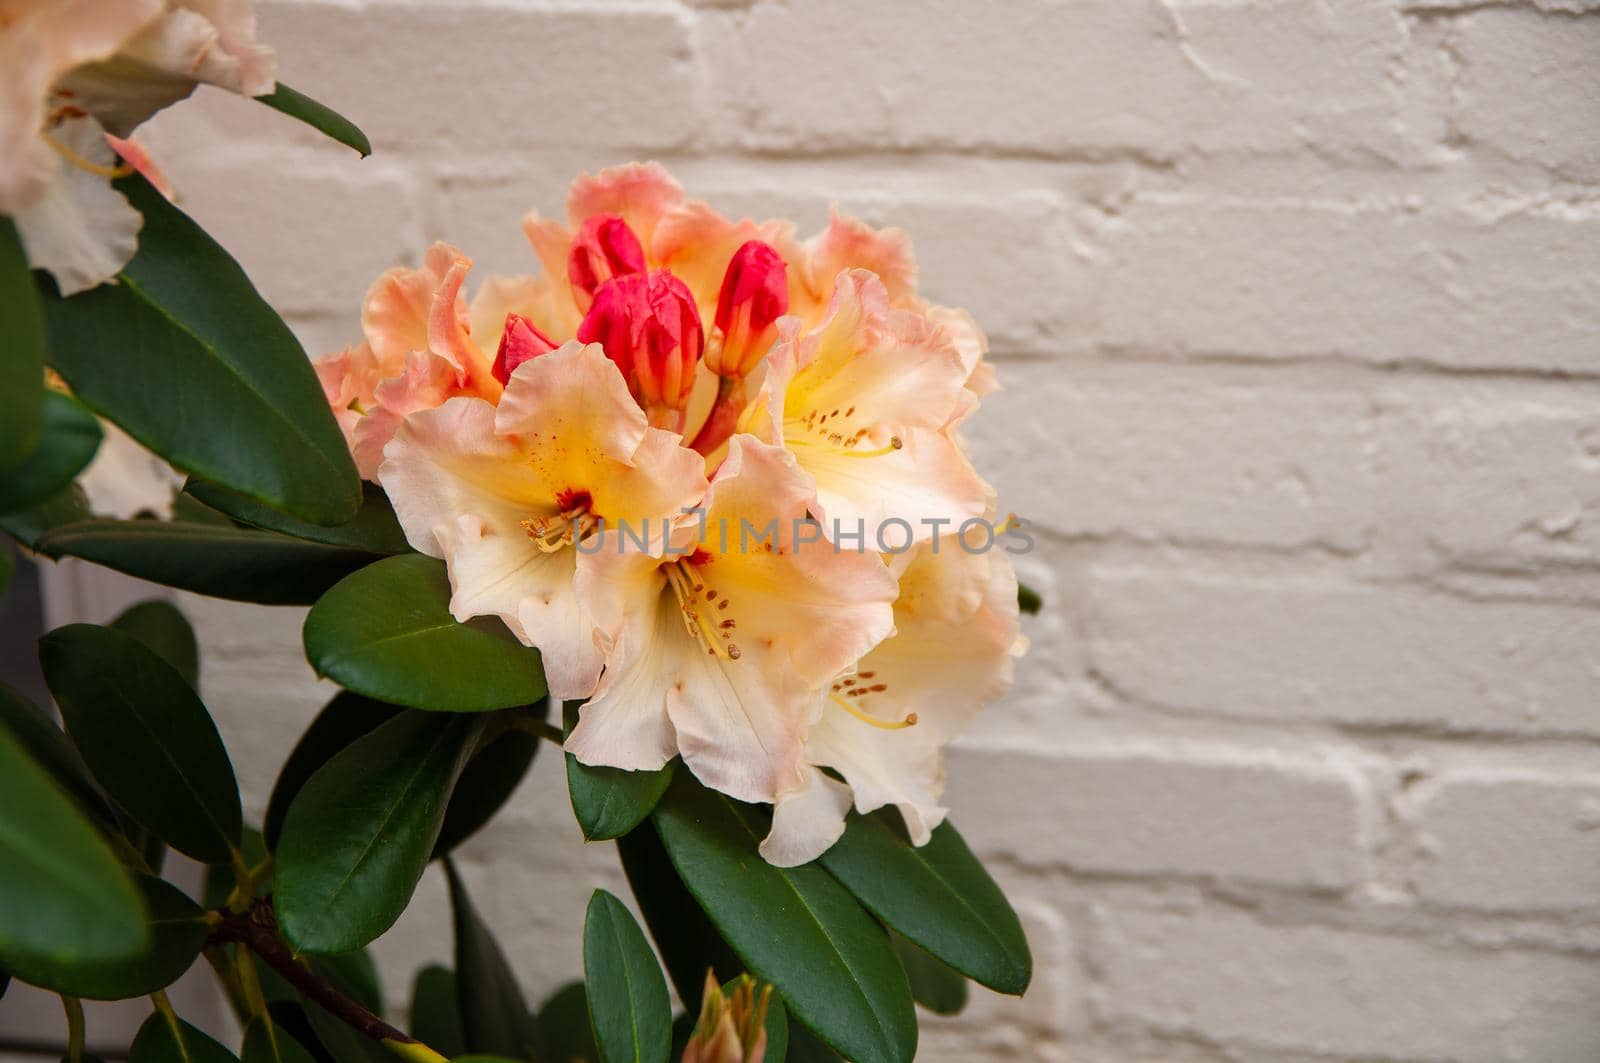 Rhododendron white flowers with pink and yellow dots in bloom, blooming evergreen shrub by ozornina